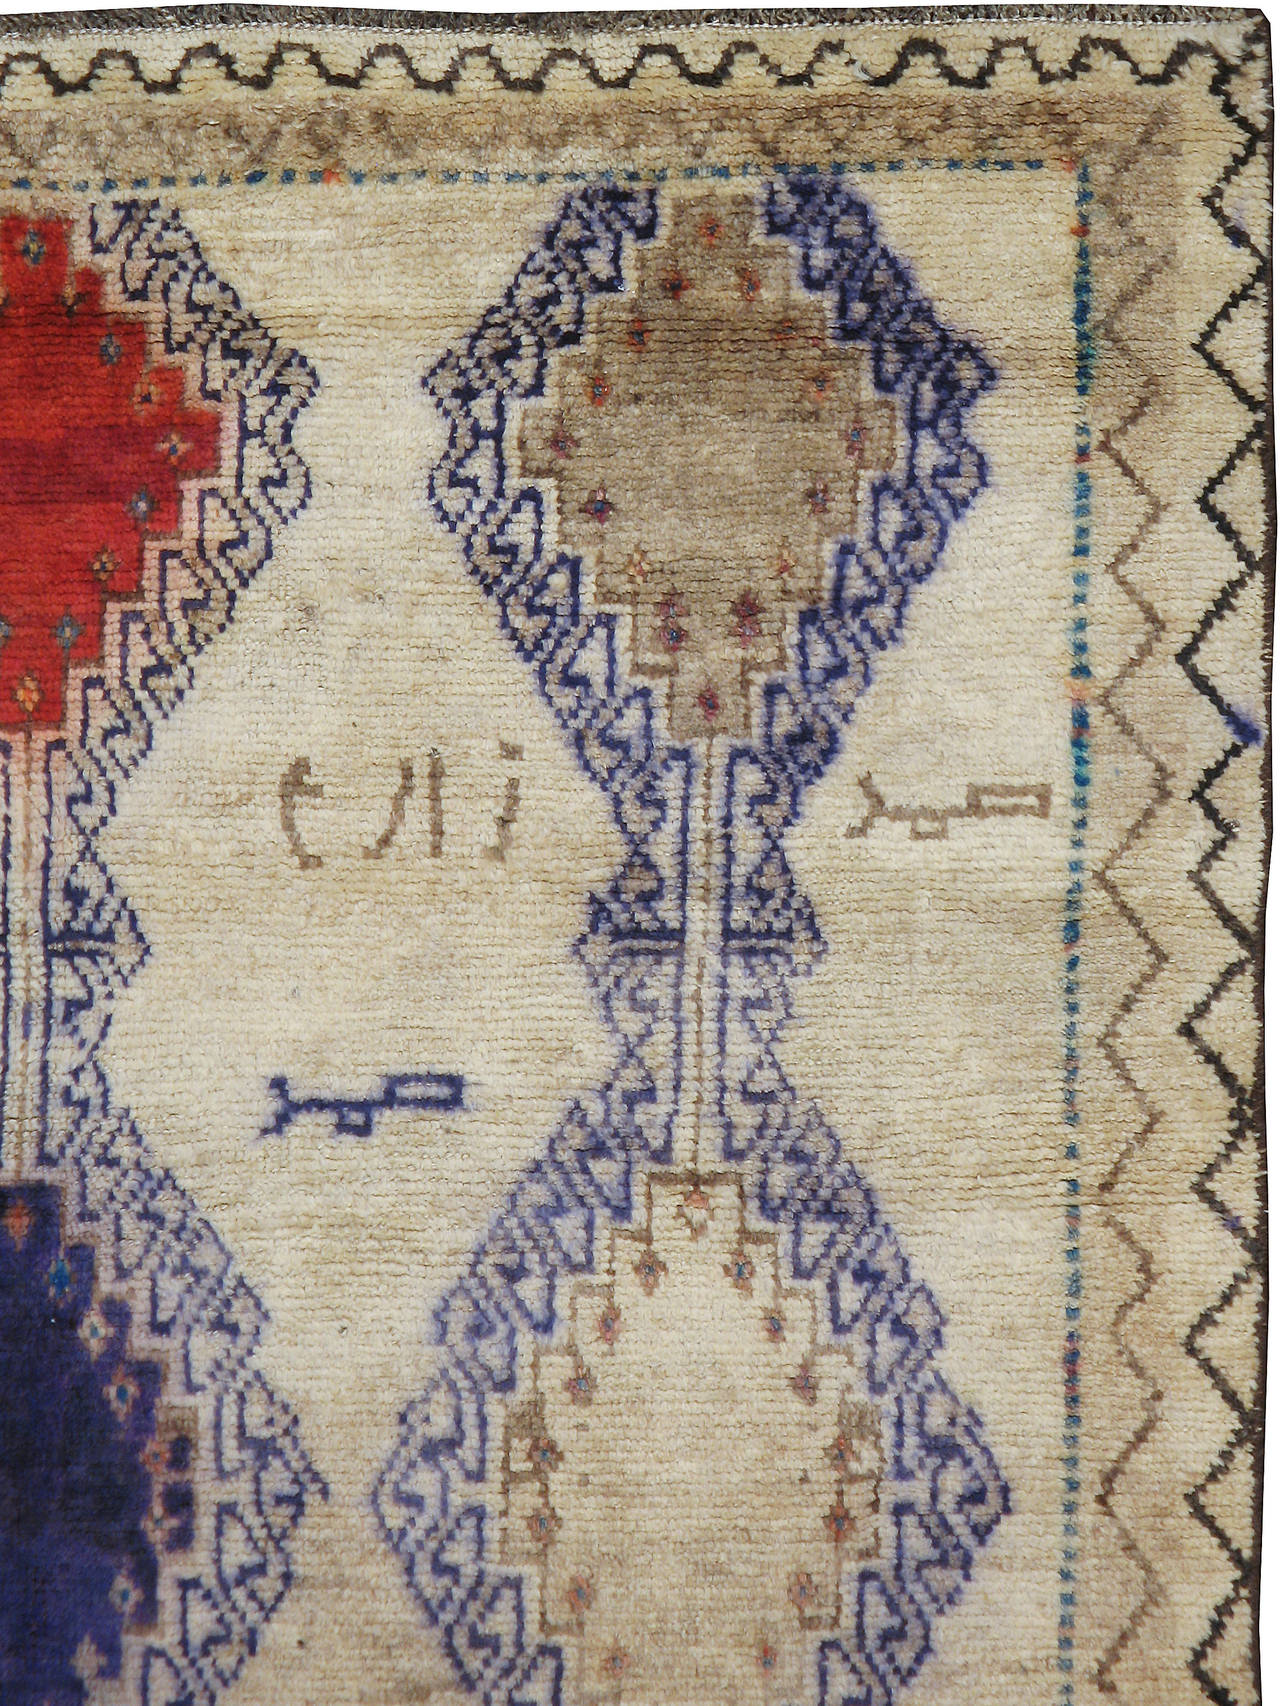 A modern Persian Gabbeh carpet from the fourth quarter of the 20th century.